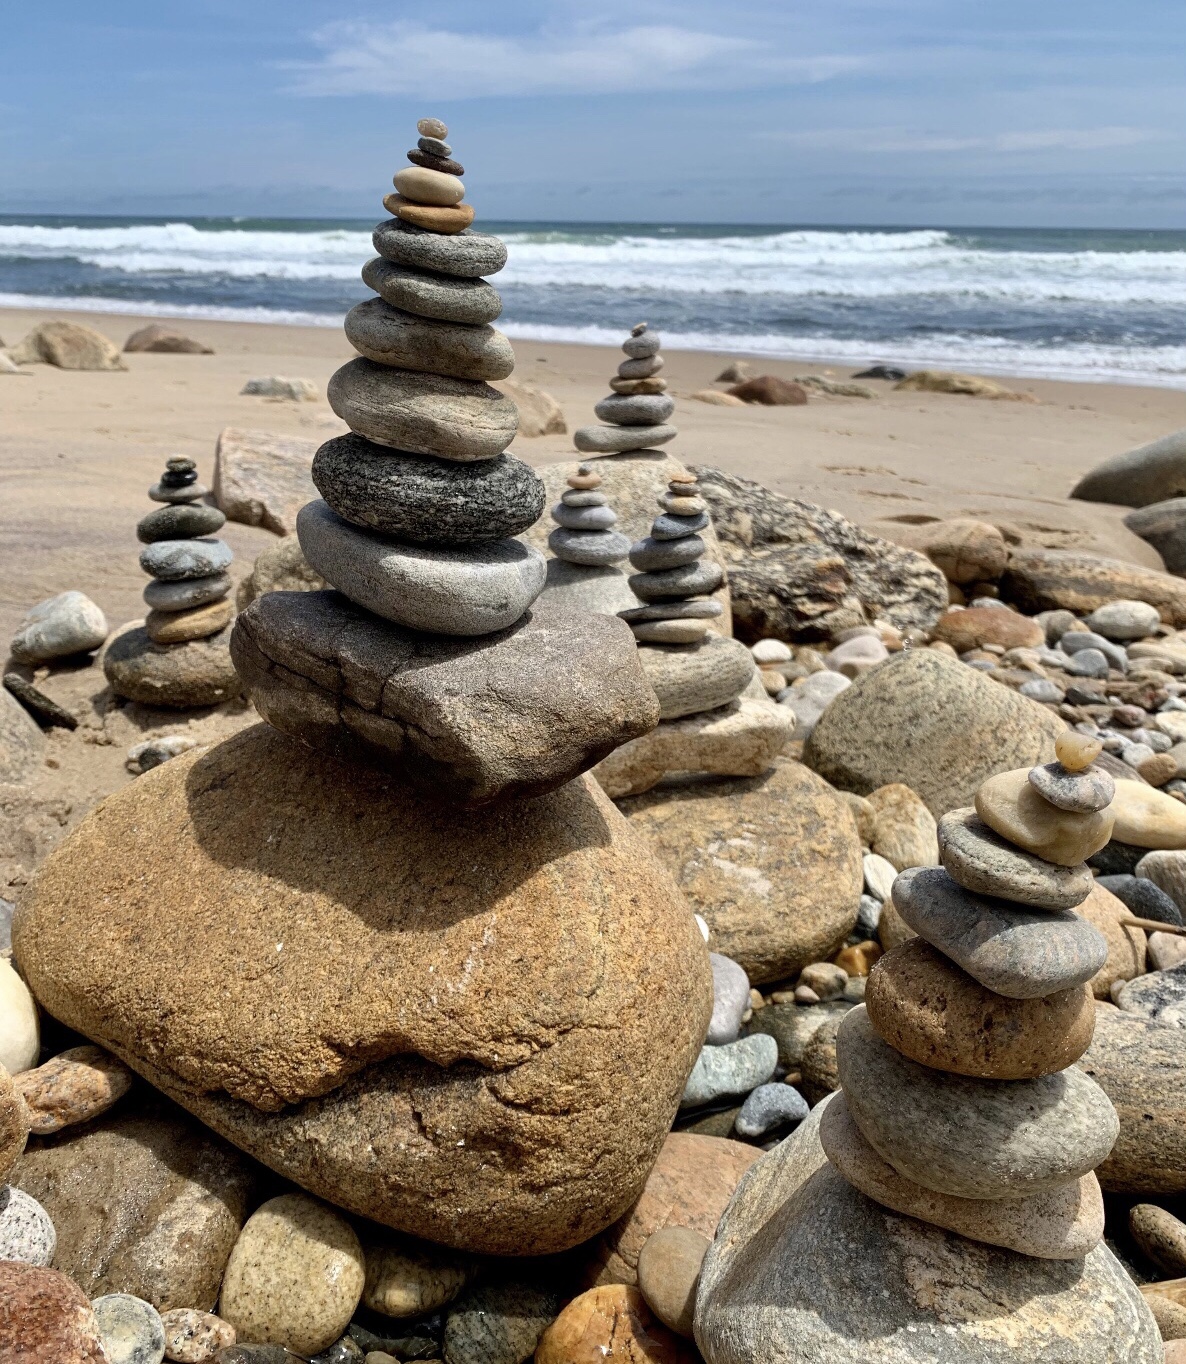 Cairns at Montauk Point State Park. Photo by Kathryn Rosalie.